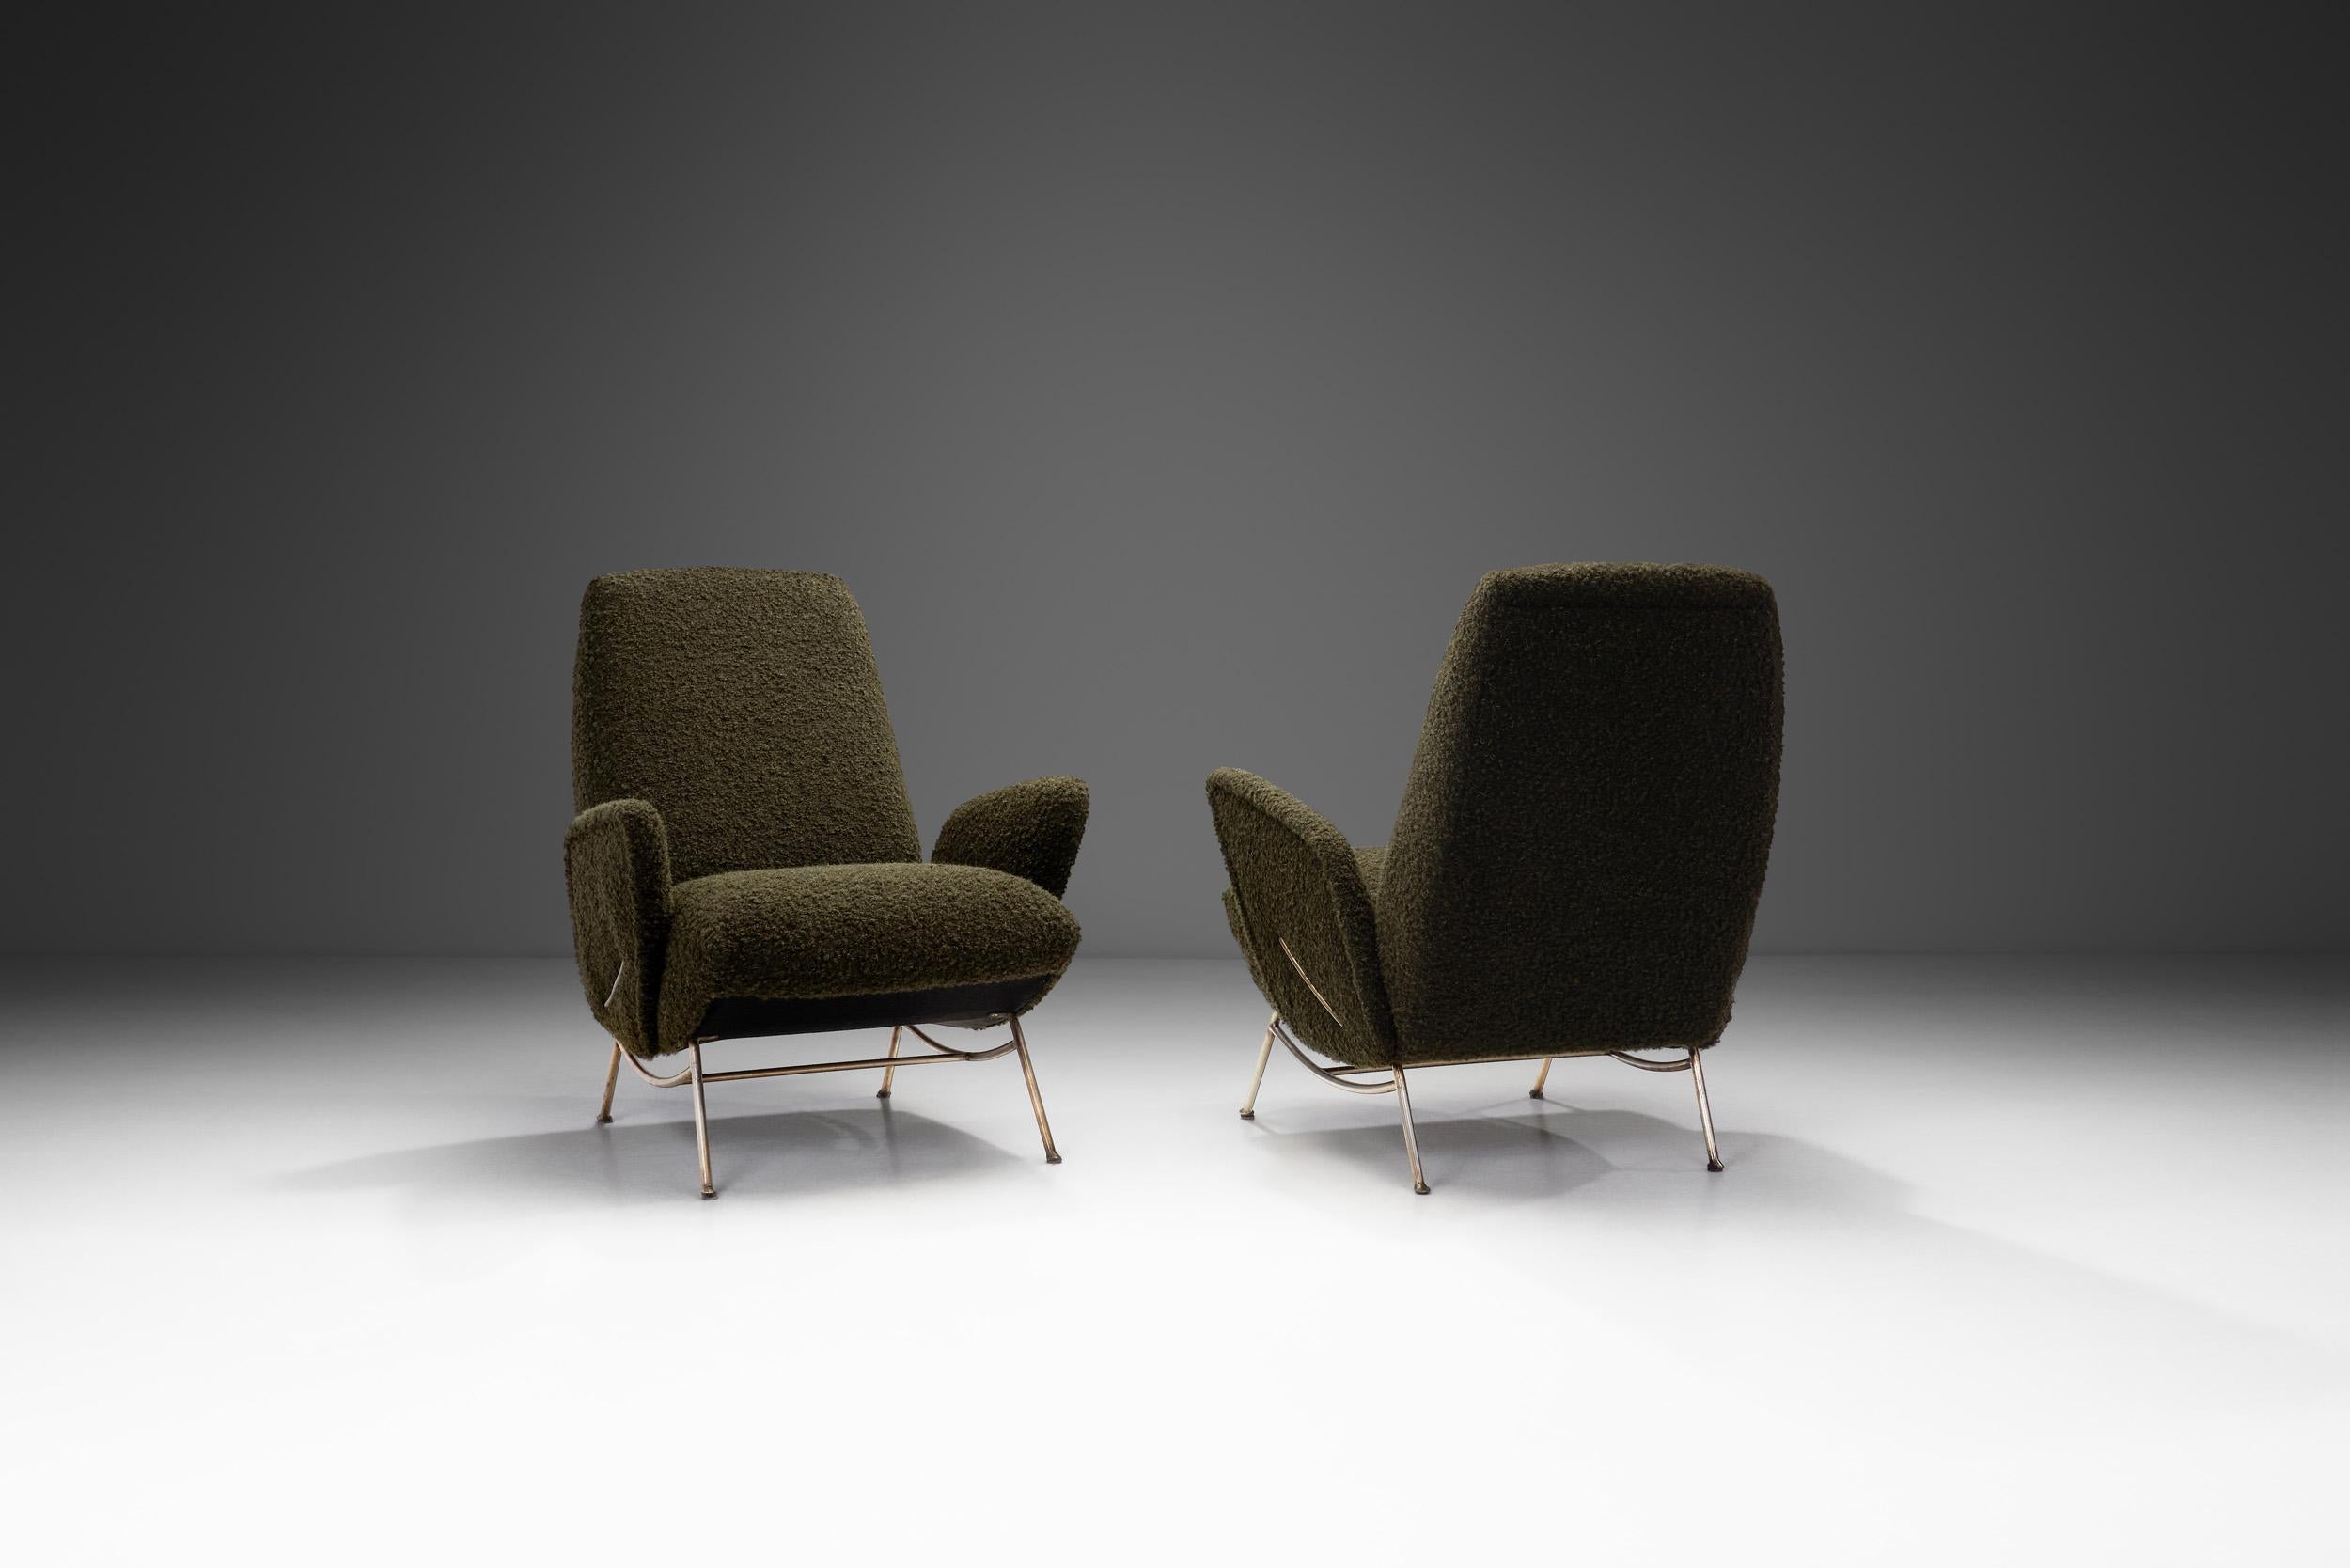 Mid-Century Modern Pair of Midcentury Lounge Chairs with Metal Legs by Nino Zoncada, Italy, 1950s For Sale